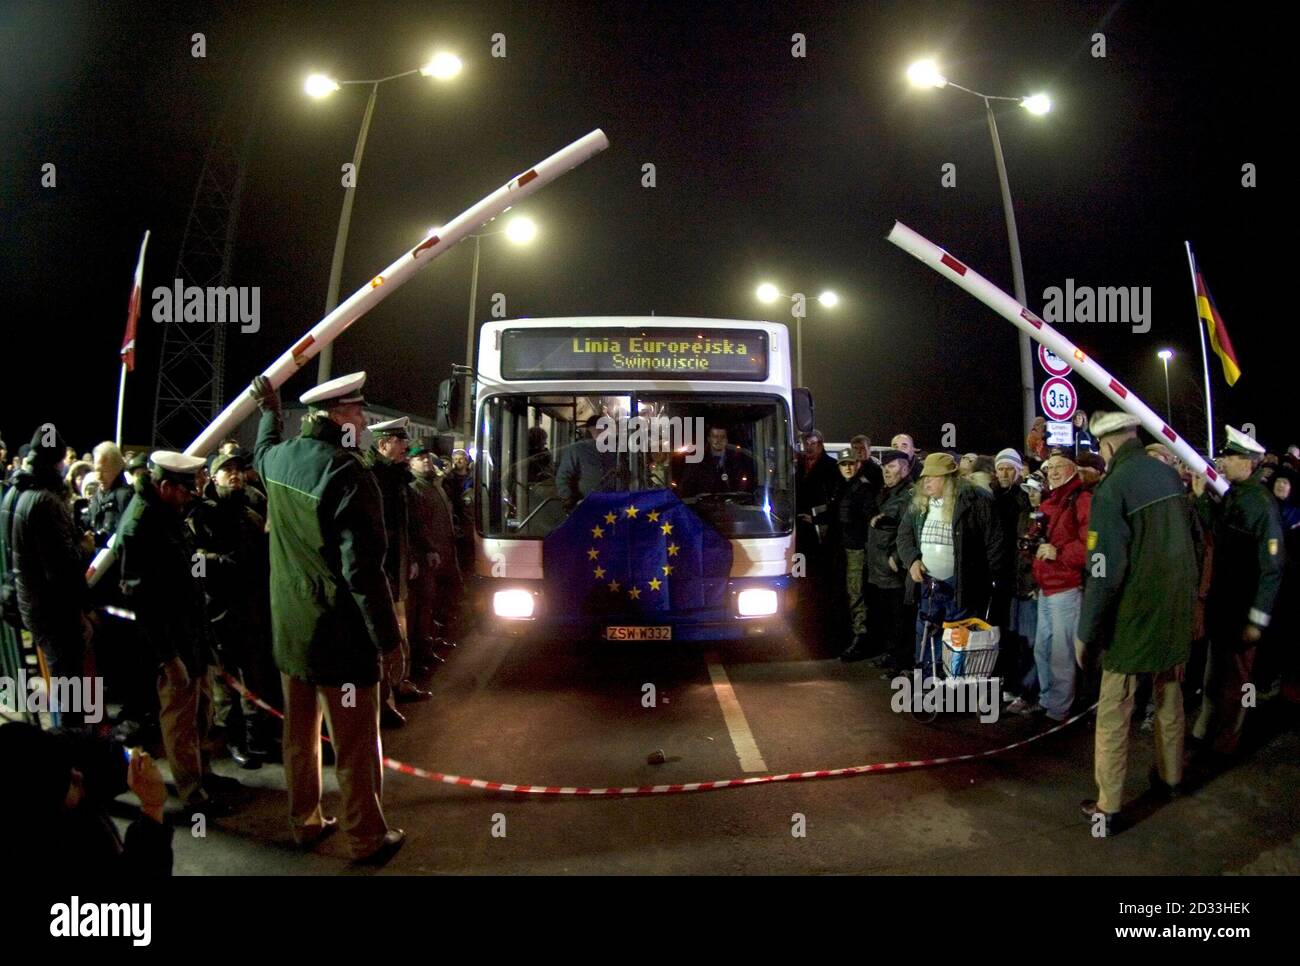 A public transport bus is brought in position during celebrations at the  German-Polish border checkpoint Ahlbeck-Swinemuende, some 200 kms (124  miles) north east of Berlin December 21, 2007. A minute after midnight